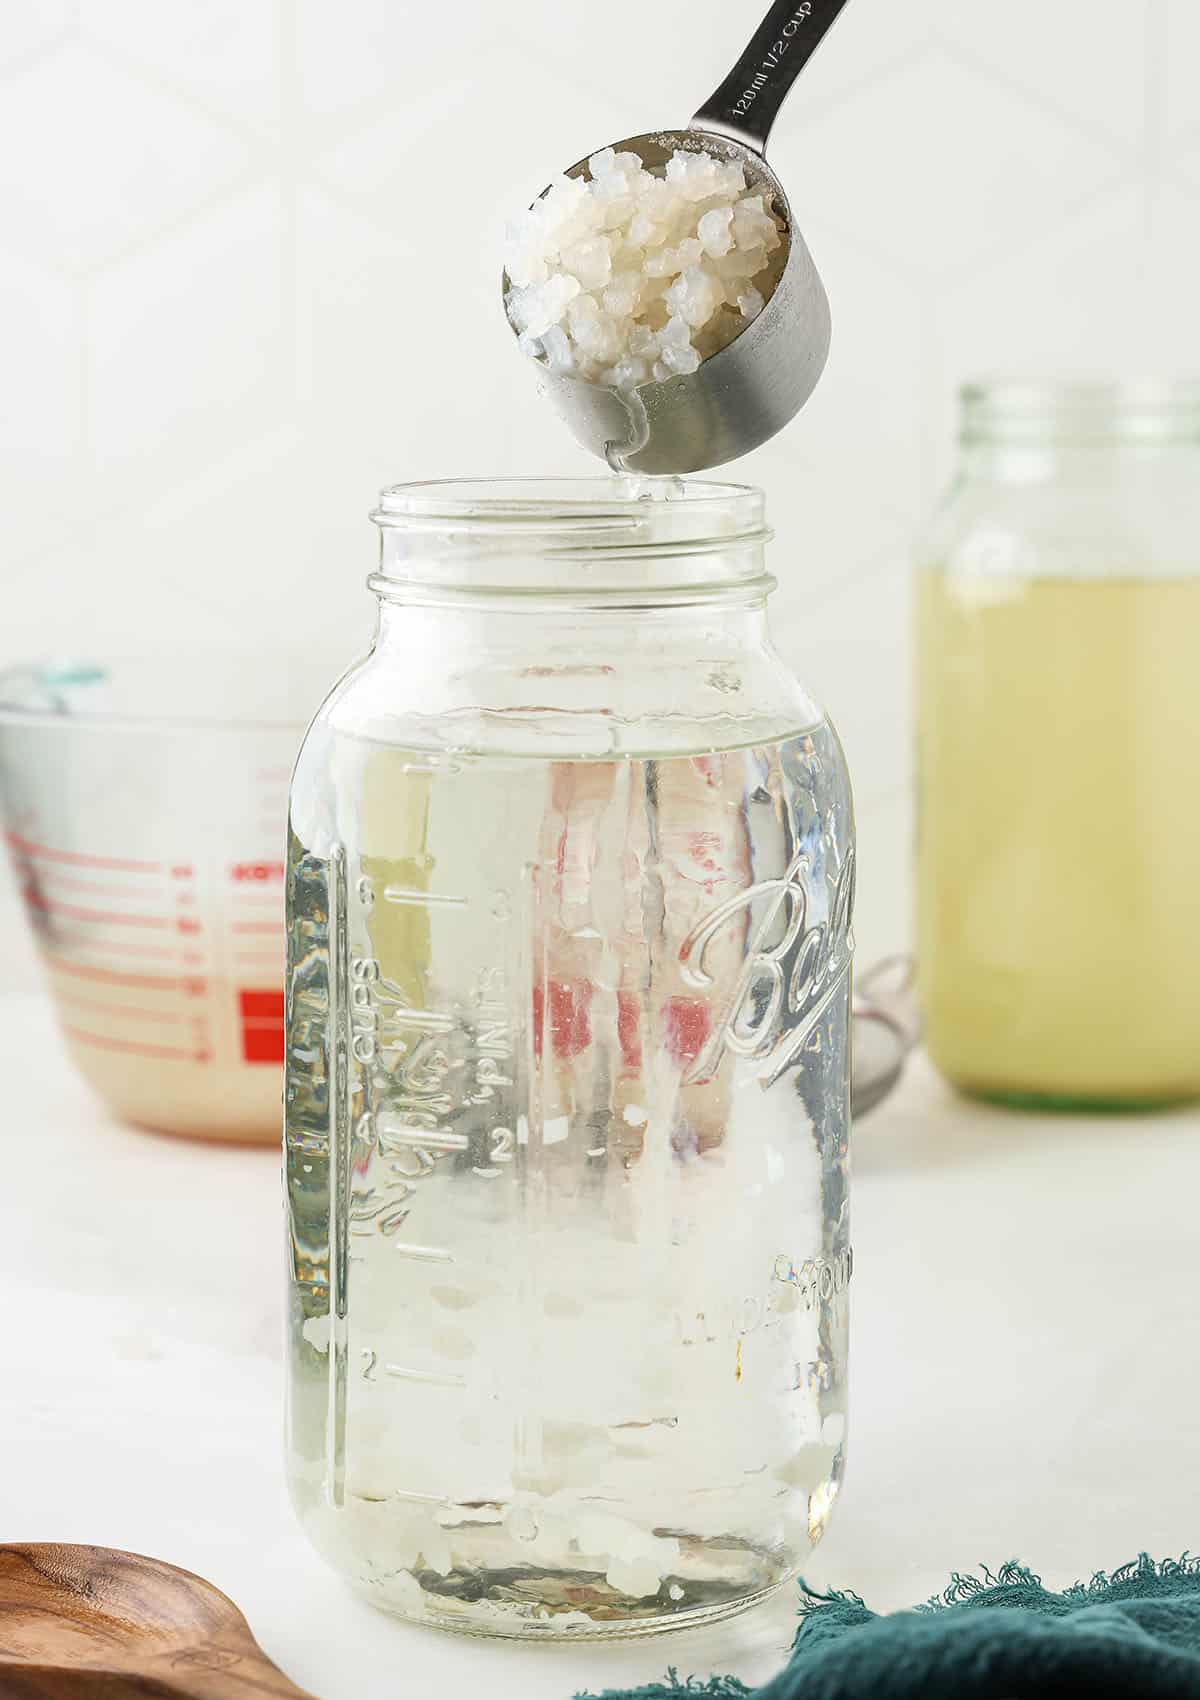 Kefir grains pouring from a cup into a jar of water. 